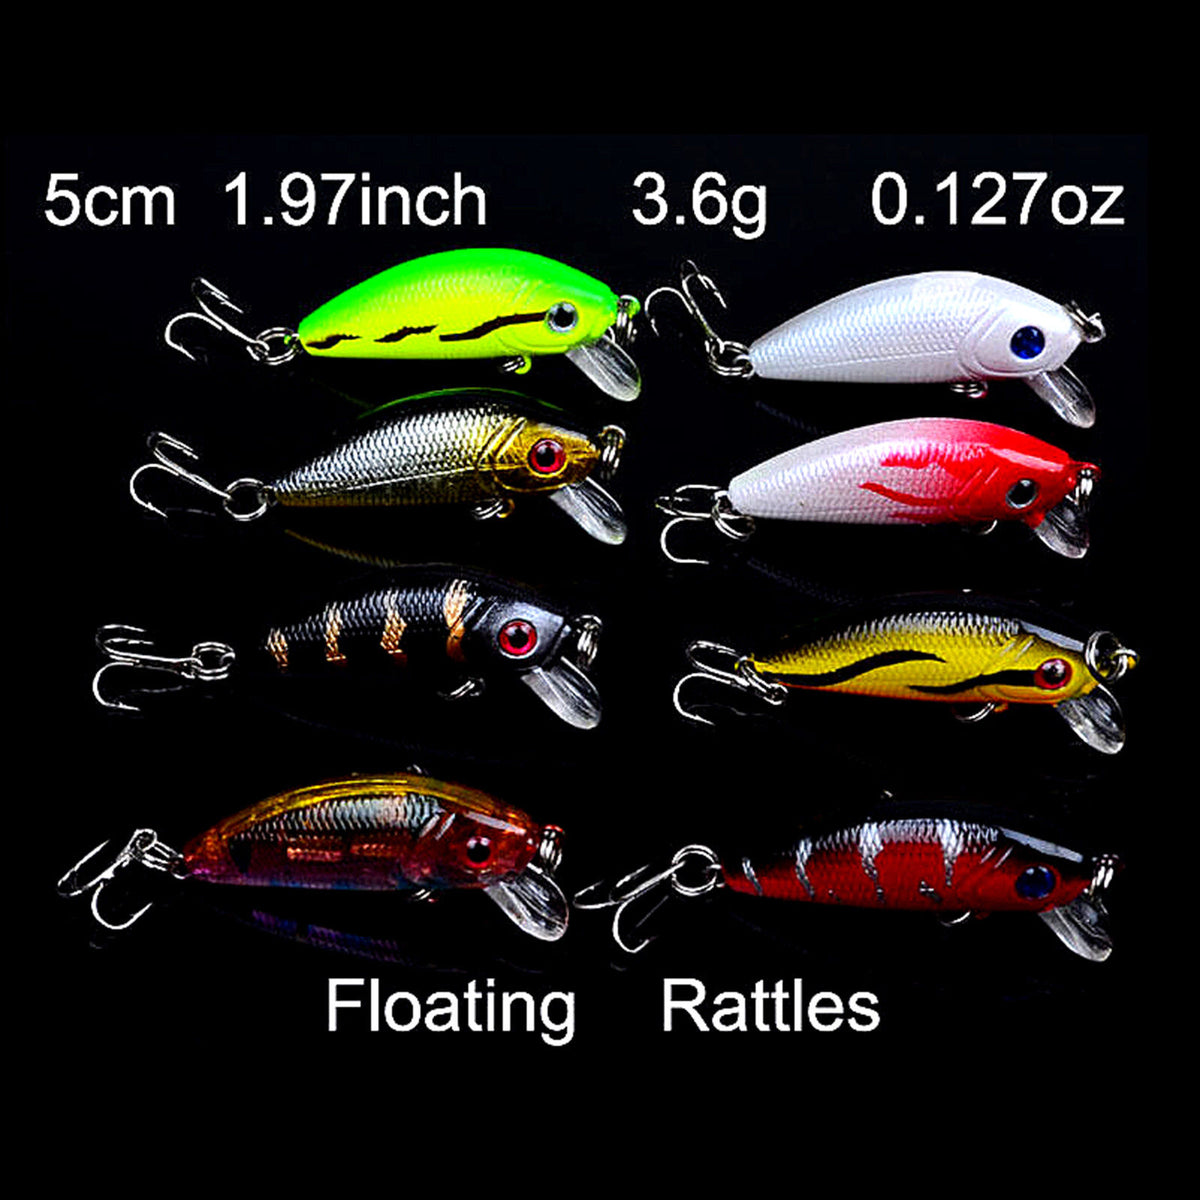 Thirsty's INCREDIBLE LURE DEAL - 56 Crank Baits Assorted Minnow